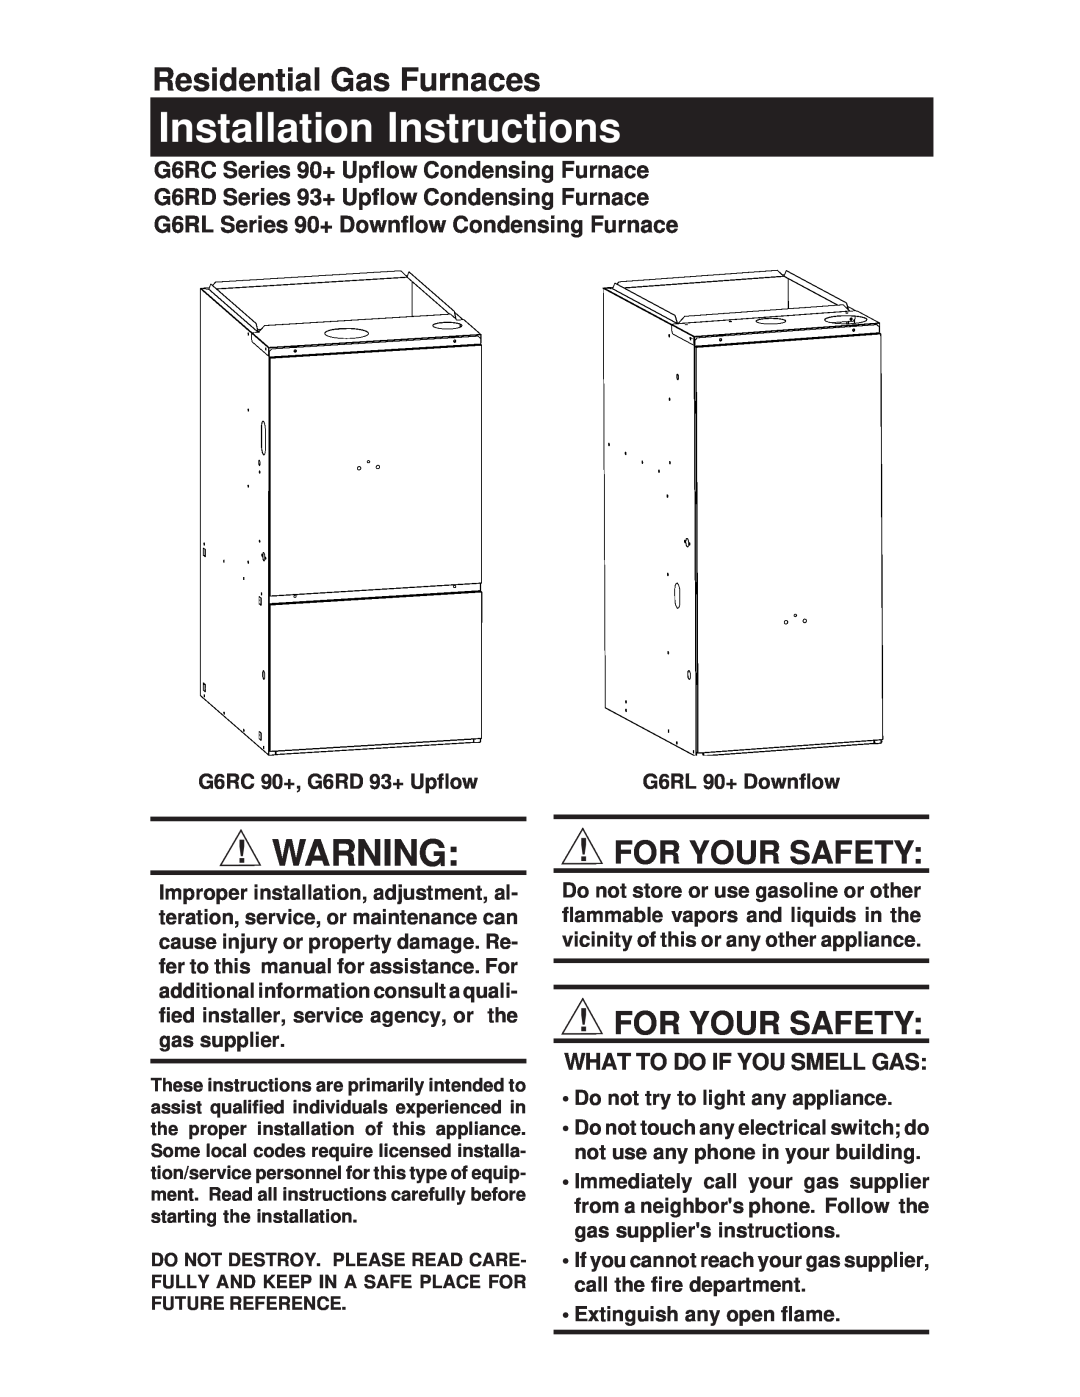 Nordyne G6RC 90+ installation instructions What To Do If You Smell Gas, Installation Instructions, For Your Safety 